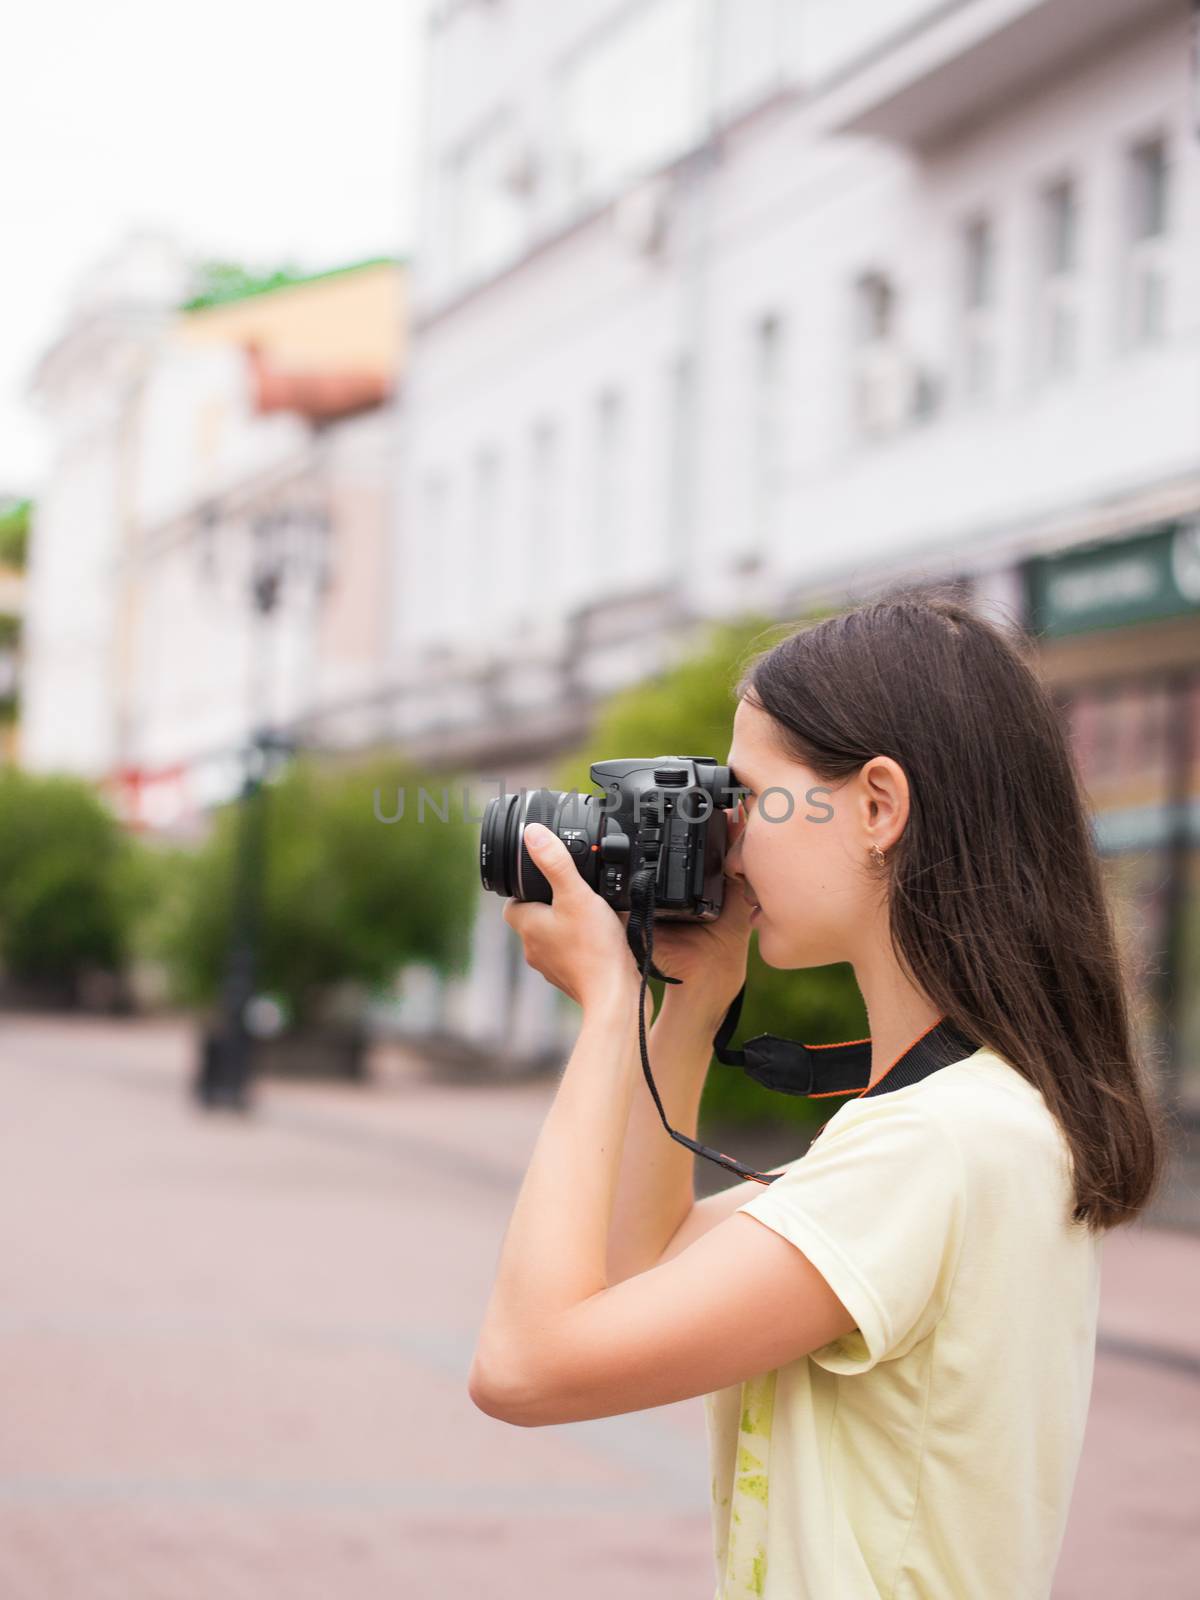 Cheerful young casual woman tourist make shots on dslr camera outdoors on city street. Vacation photography travel concept